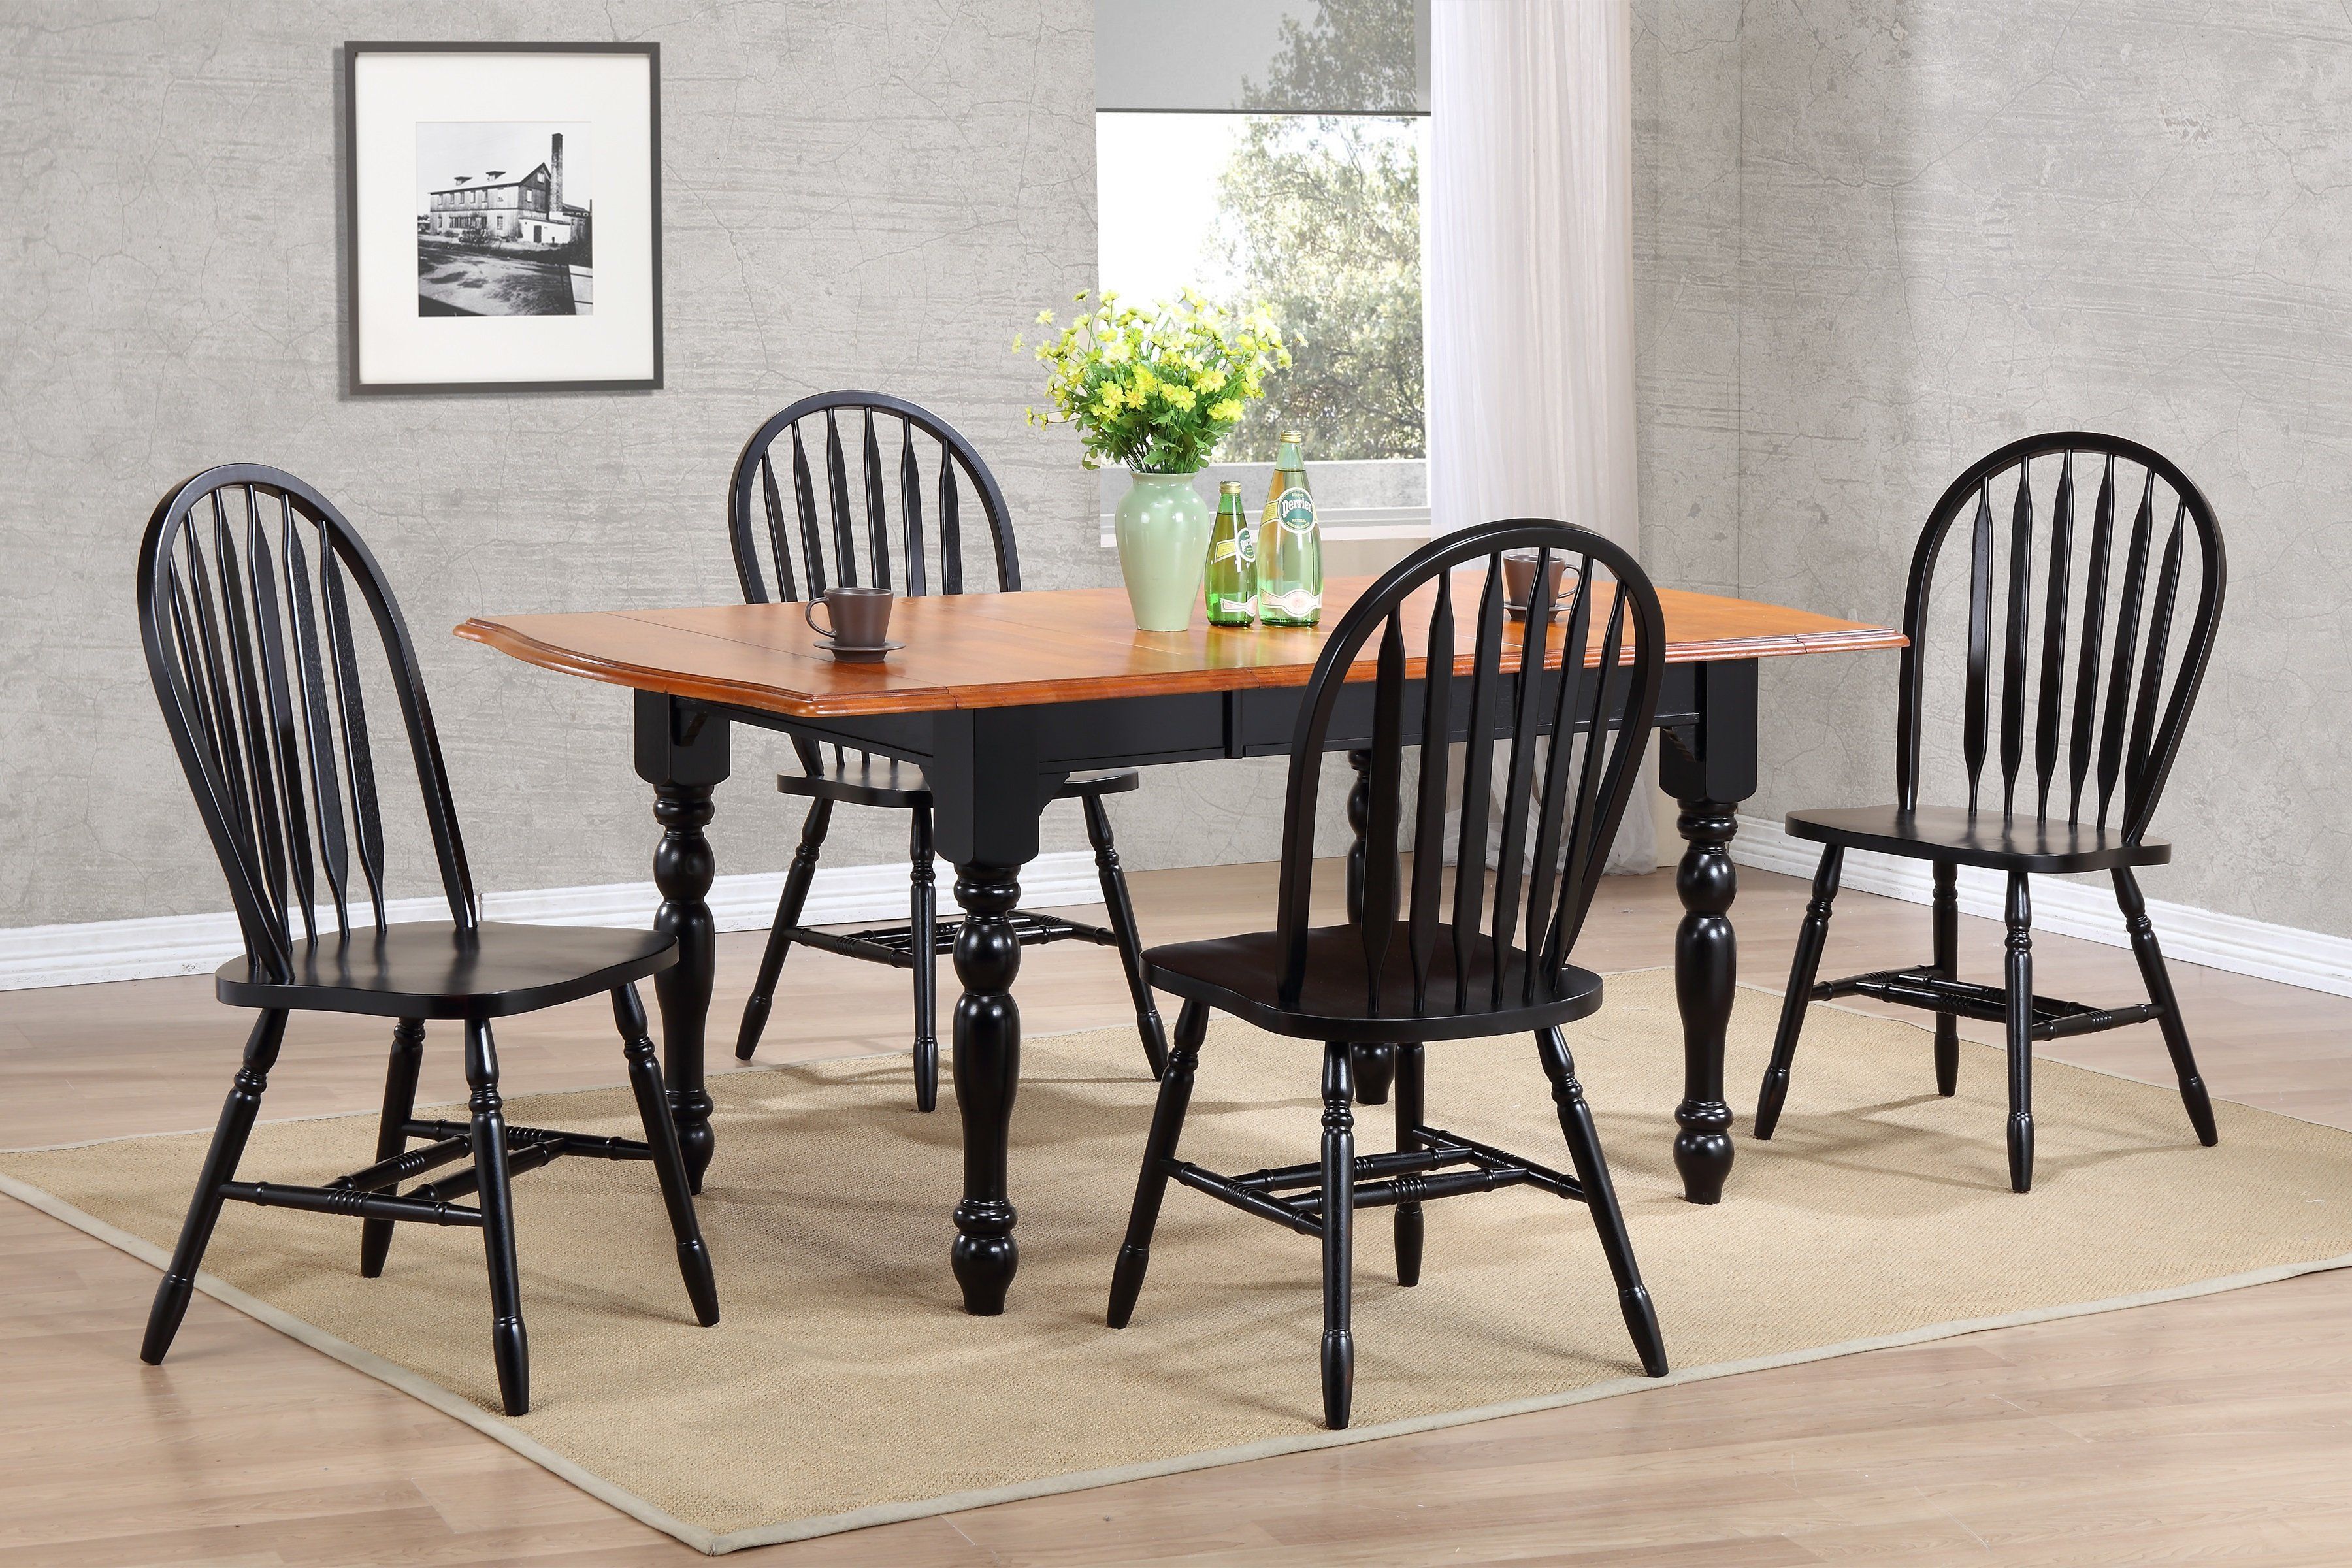 Irie 5 Piece Dining Set With Recent Pattonsburg 5 Piece Dining Sets (View 16 of 20)